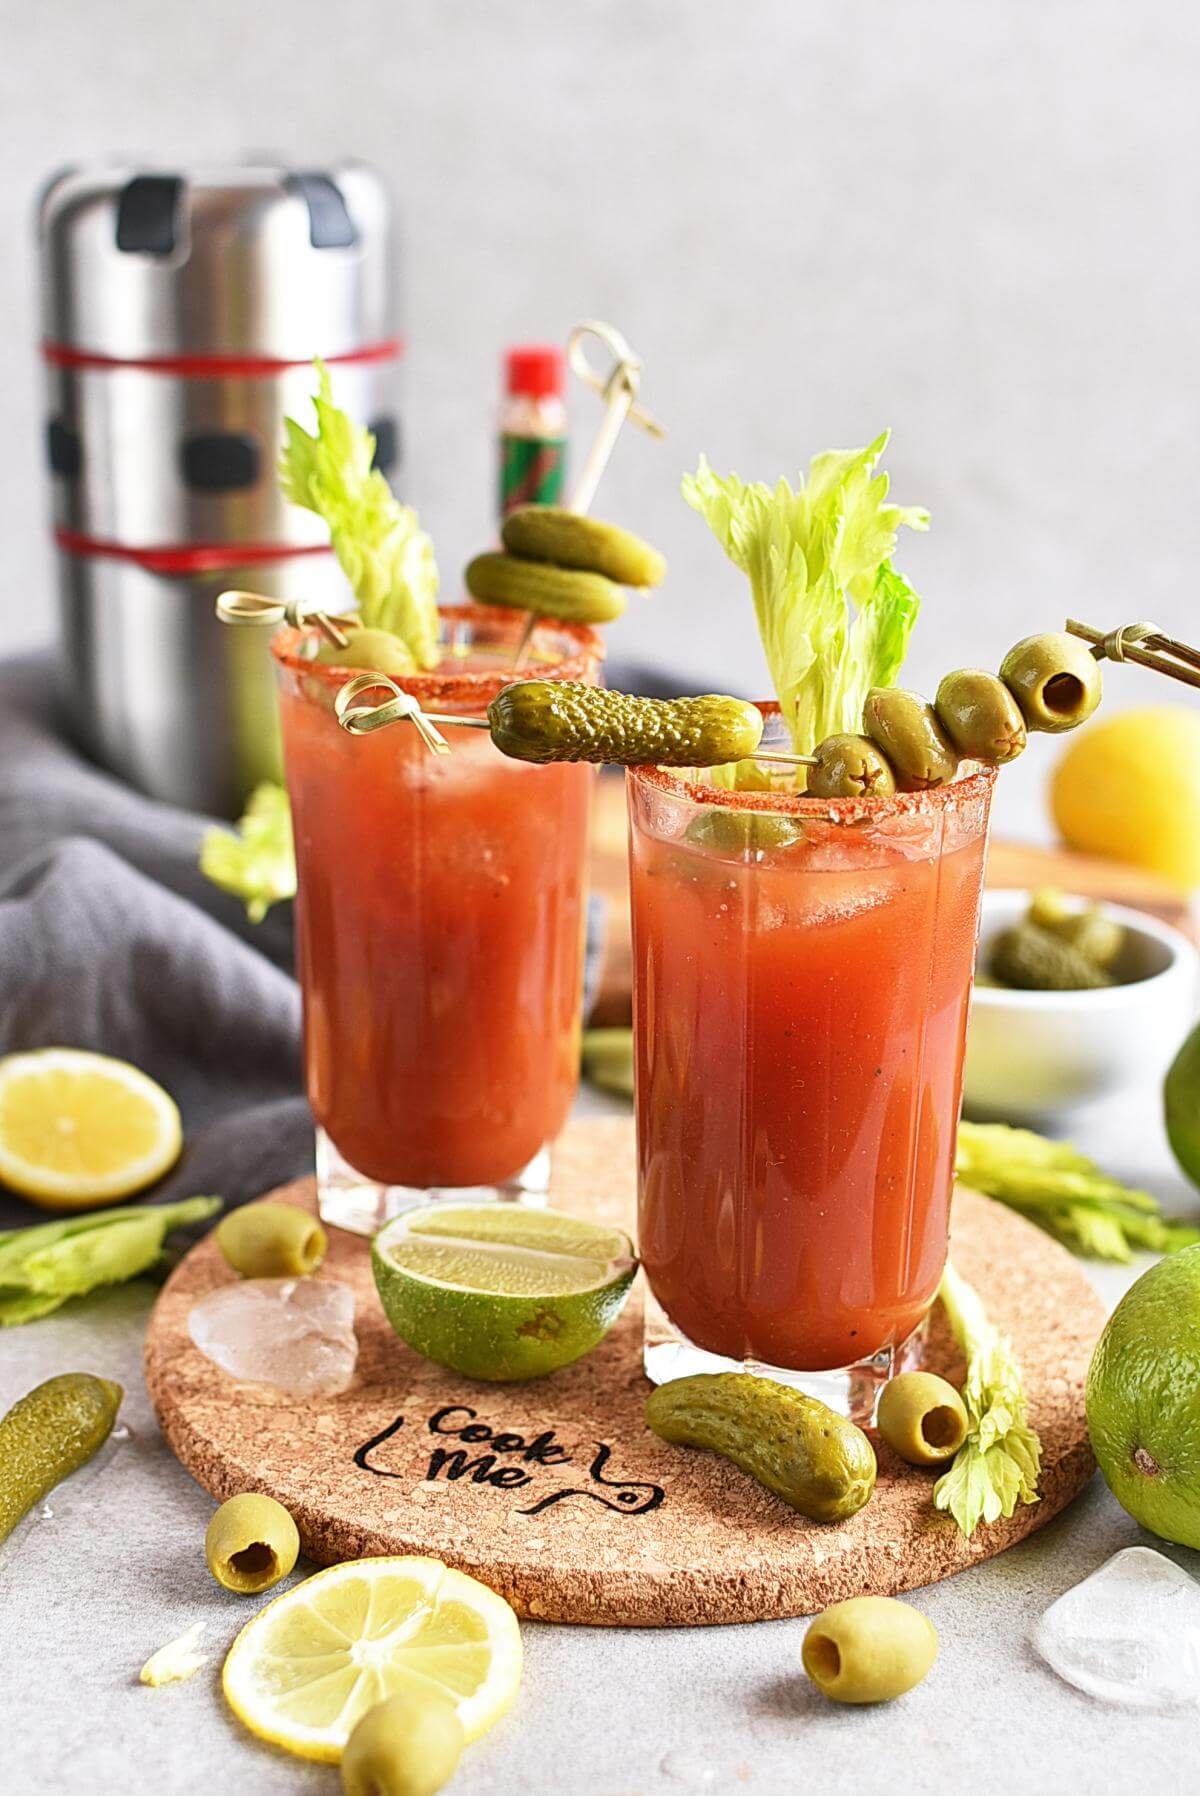 https://cook.me/wp-content/uploads/2021/04/Mexican-Bloody-Maria-cocktail-Recipes%E2%80%93Homemade-Mexican-Bloody-Maria-cocktail-%E2%80%93Delicious-Mexican-Bloody-Maria-cocktail-9.jpg